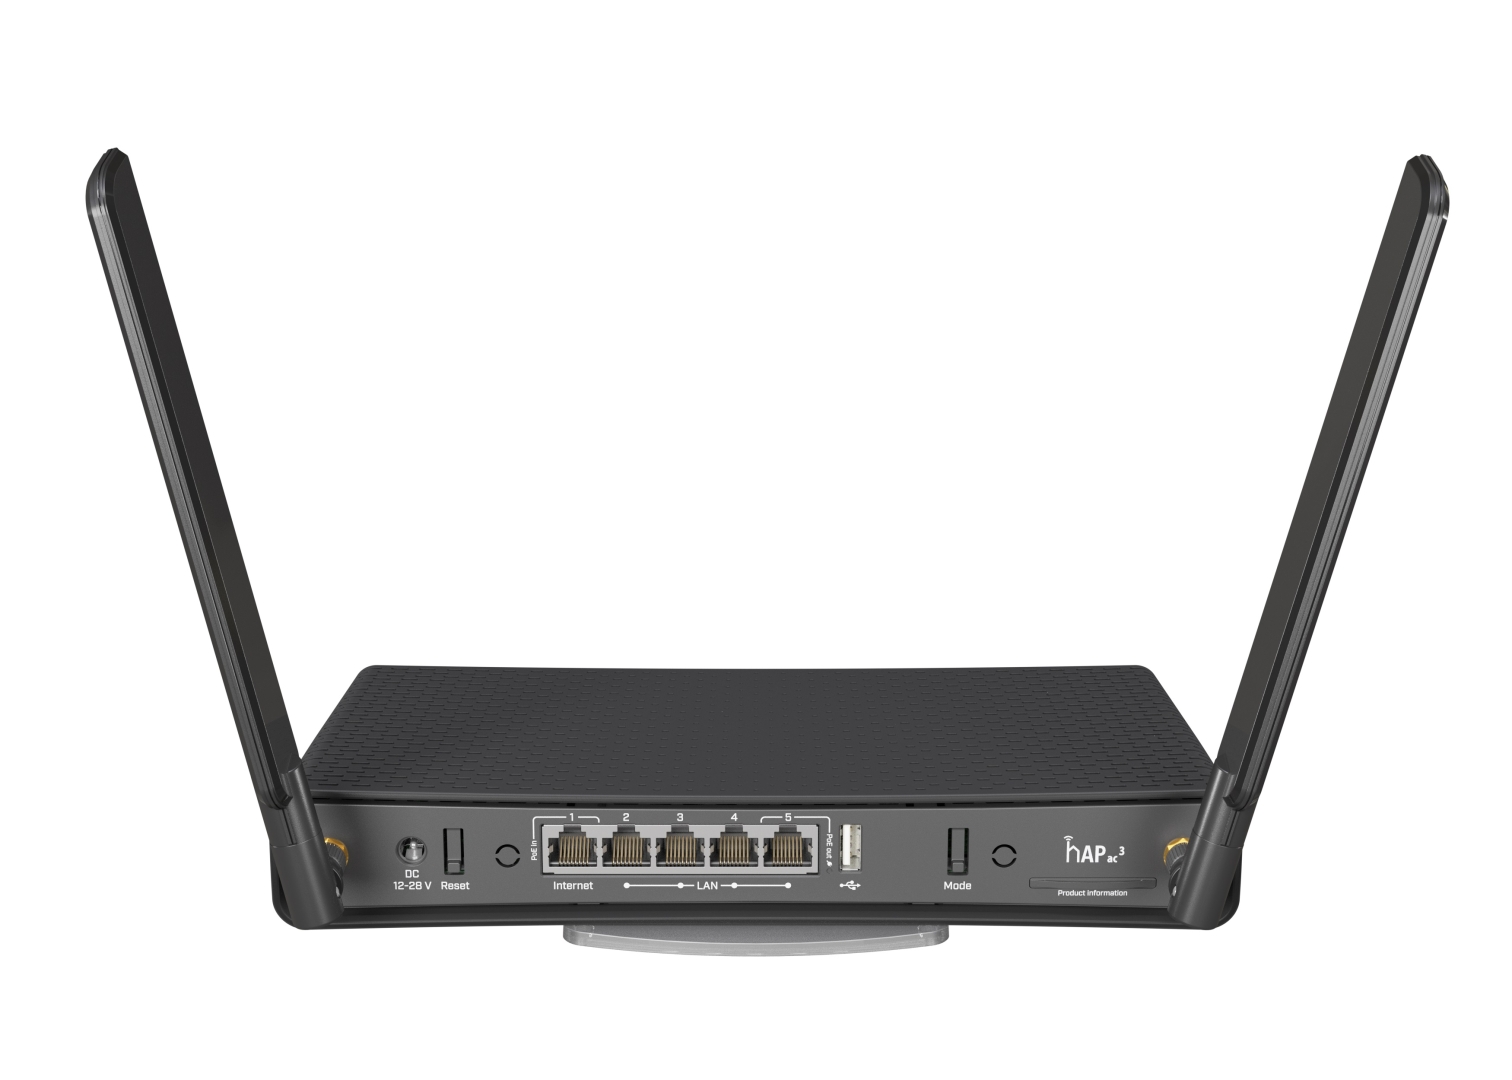 MIKROTIK wireless dual-band router with 5 Gigabit Ethernet ports and  external high gain antennas for more coverage, hAP ac3 with RouterOS L4  license (RBD53iG-5HacD2HnD) - The source for WiFi products at best